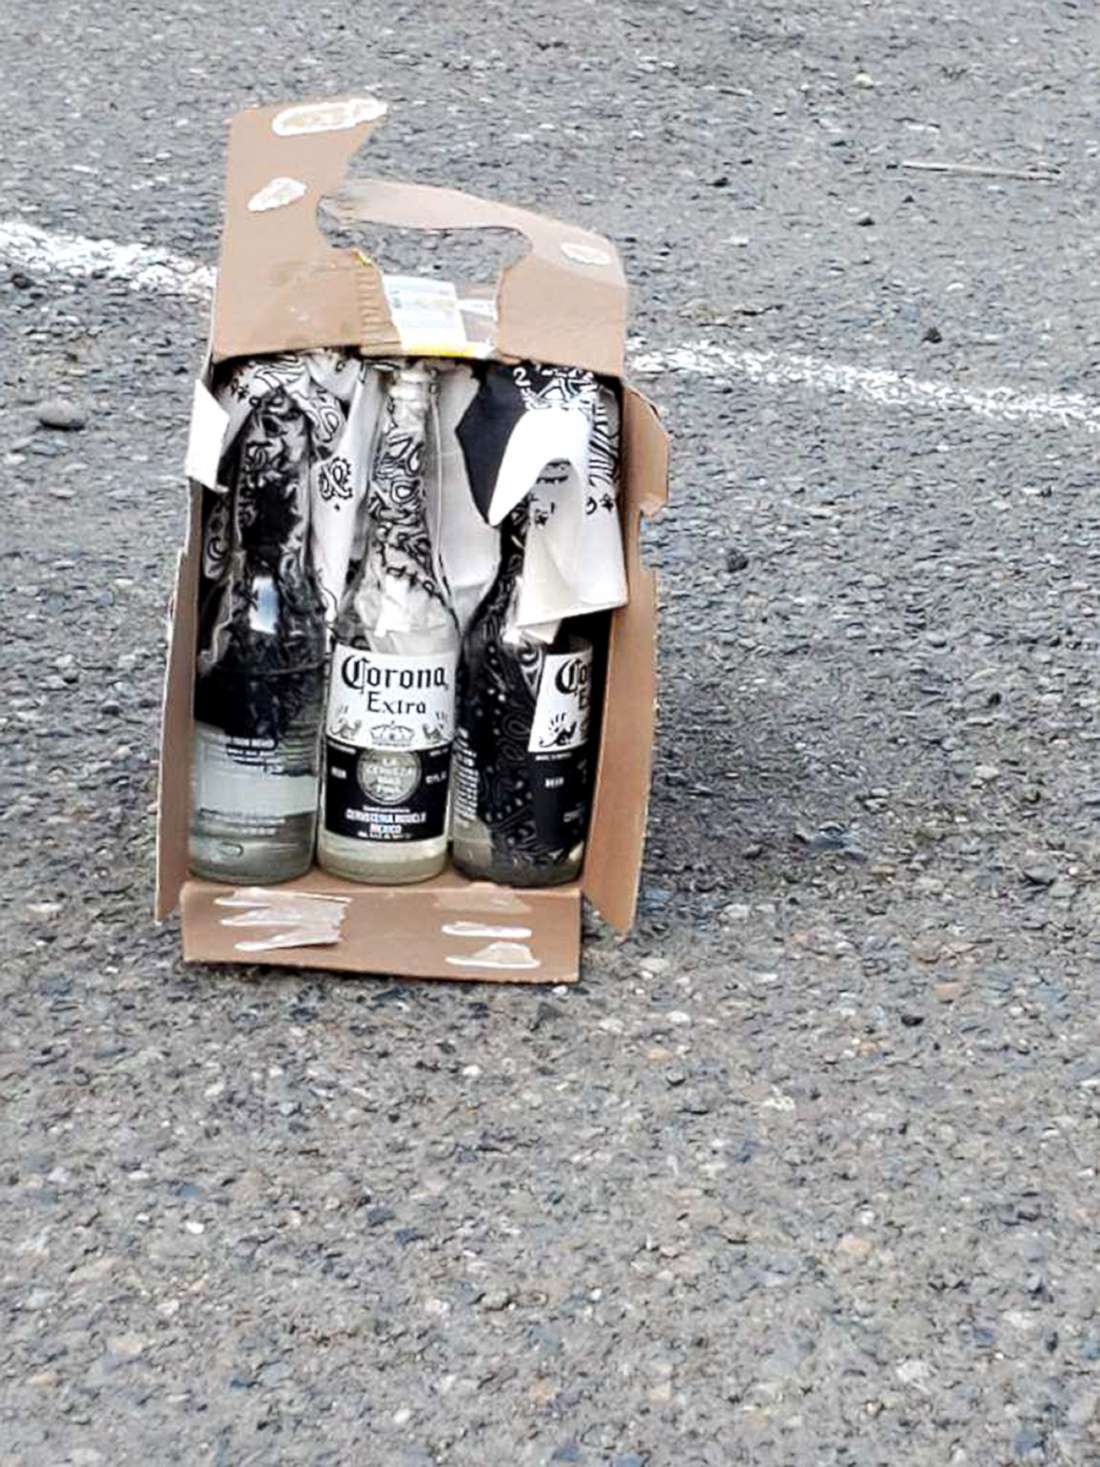 PHOTO: Seattle Police shared this image on their Twitter feed of Molotov cocktails they said were recovered outside the Seattle Police Officer's Guild Office, Sept. 7, 2020.